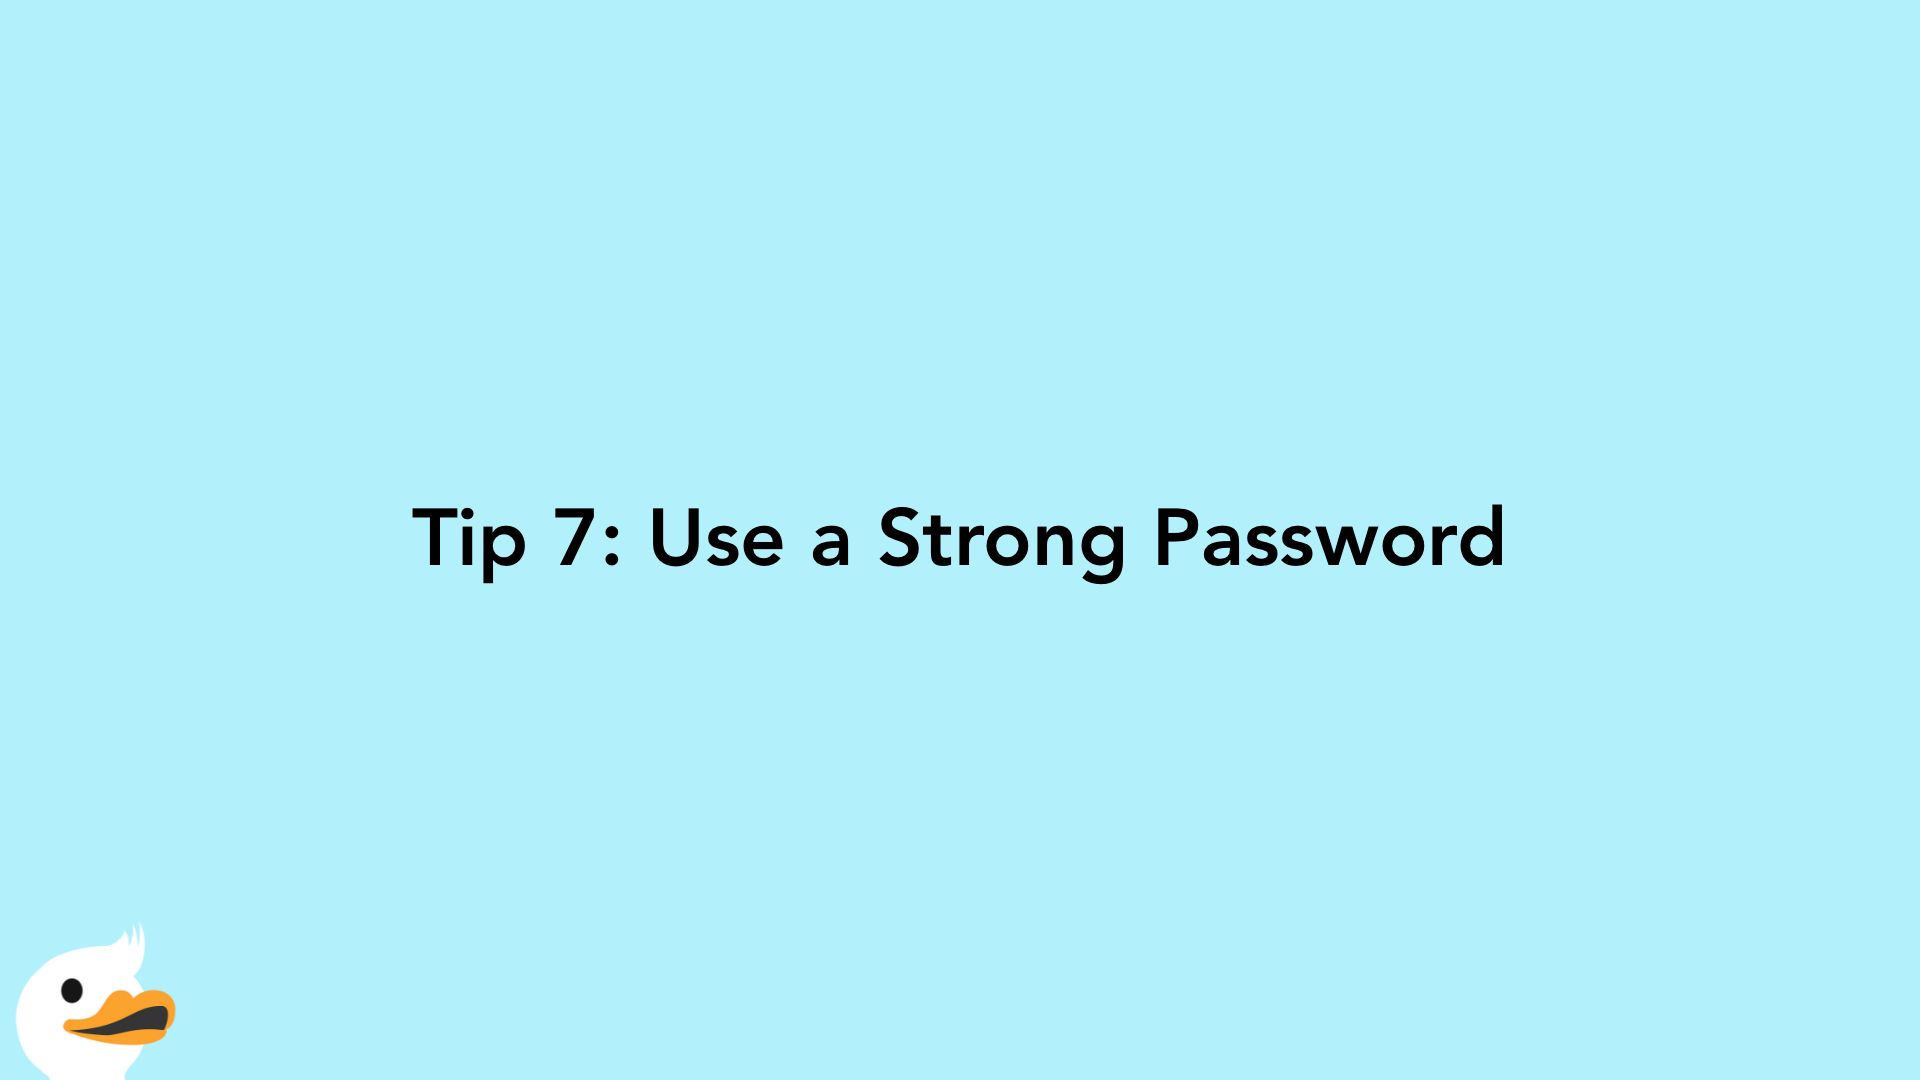 Tip 7: Use a Strong Password